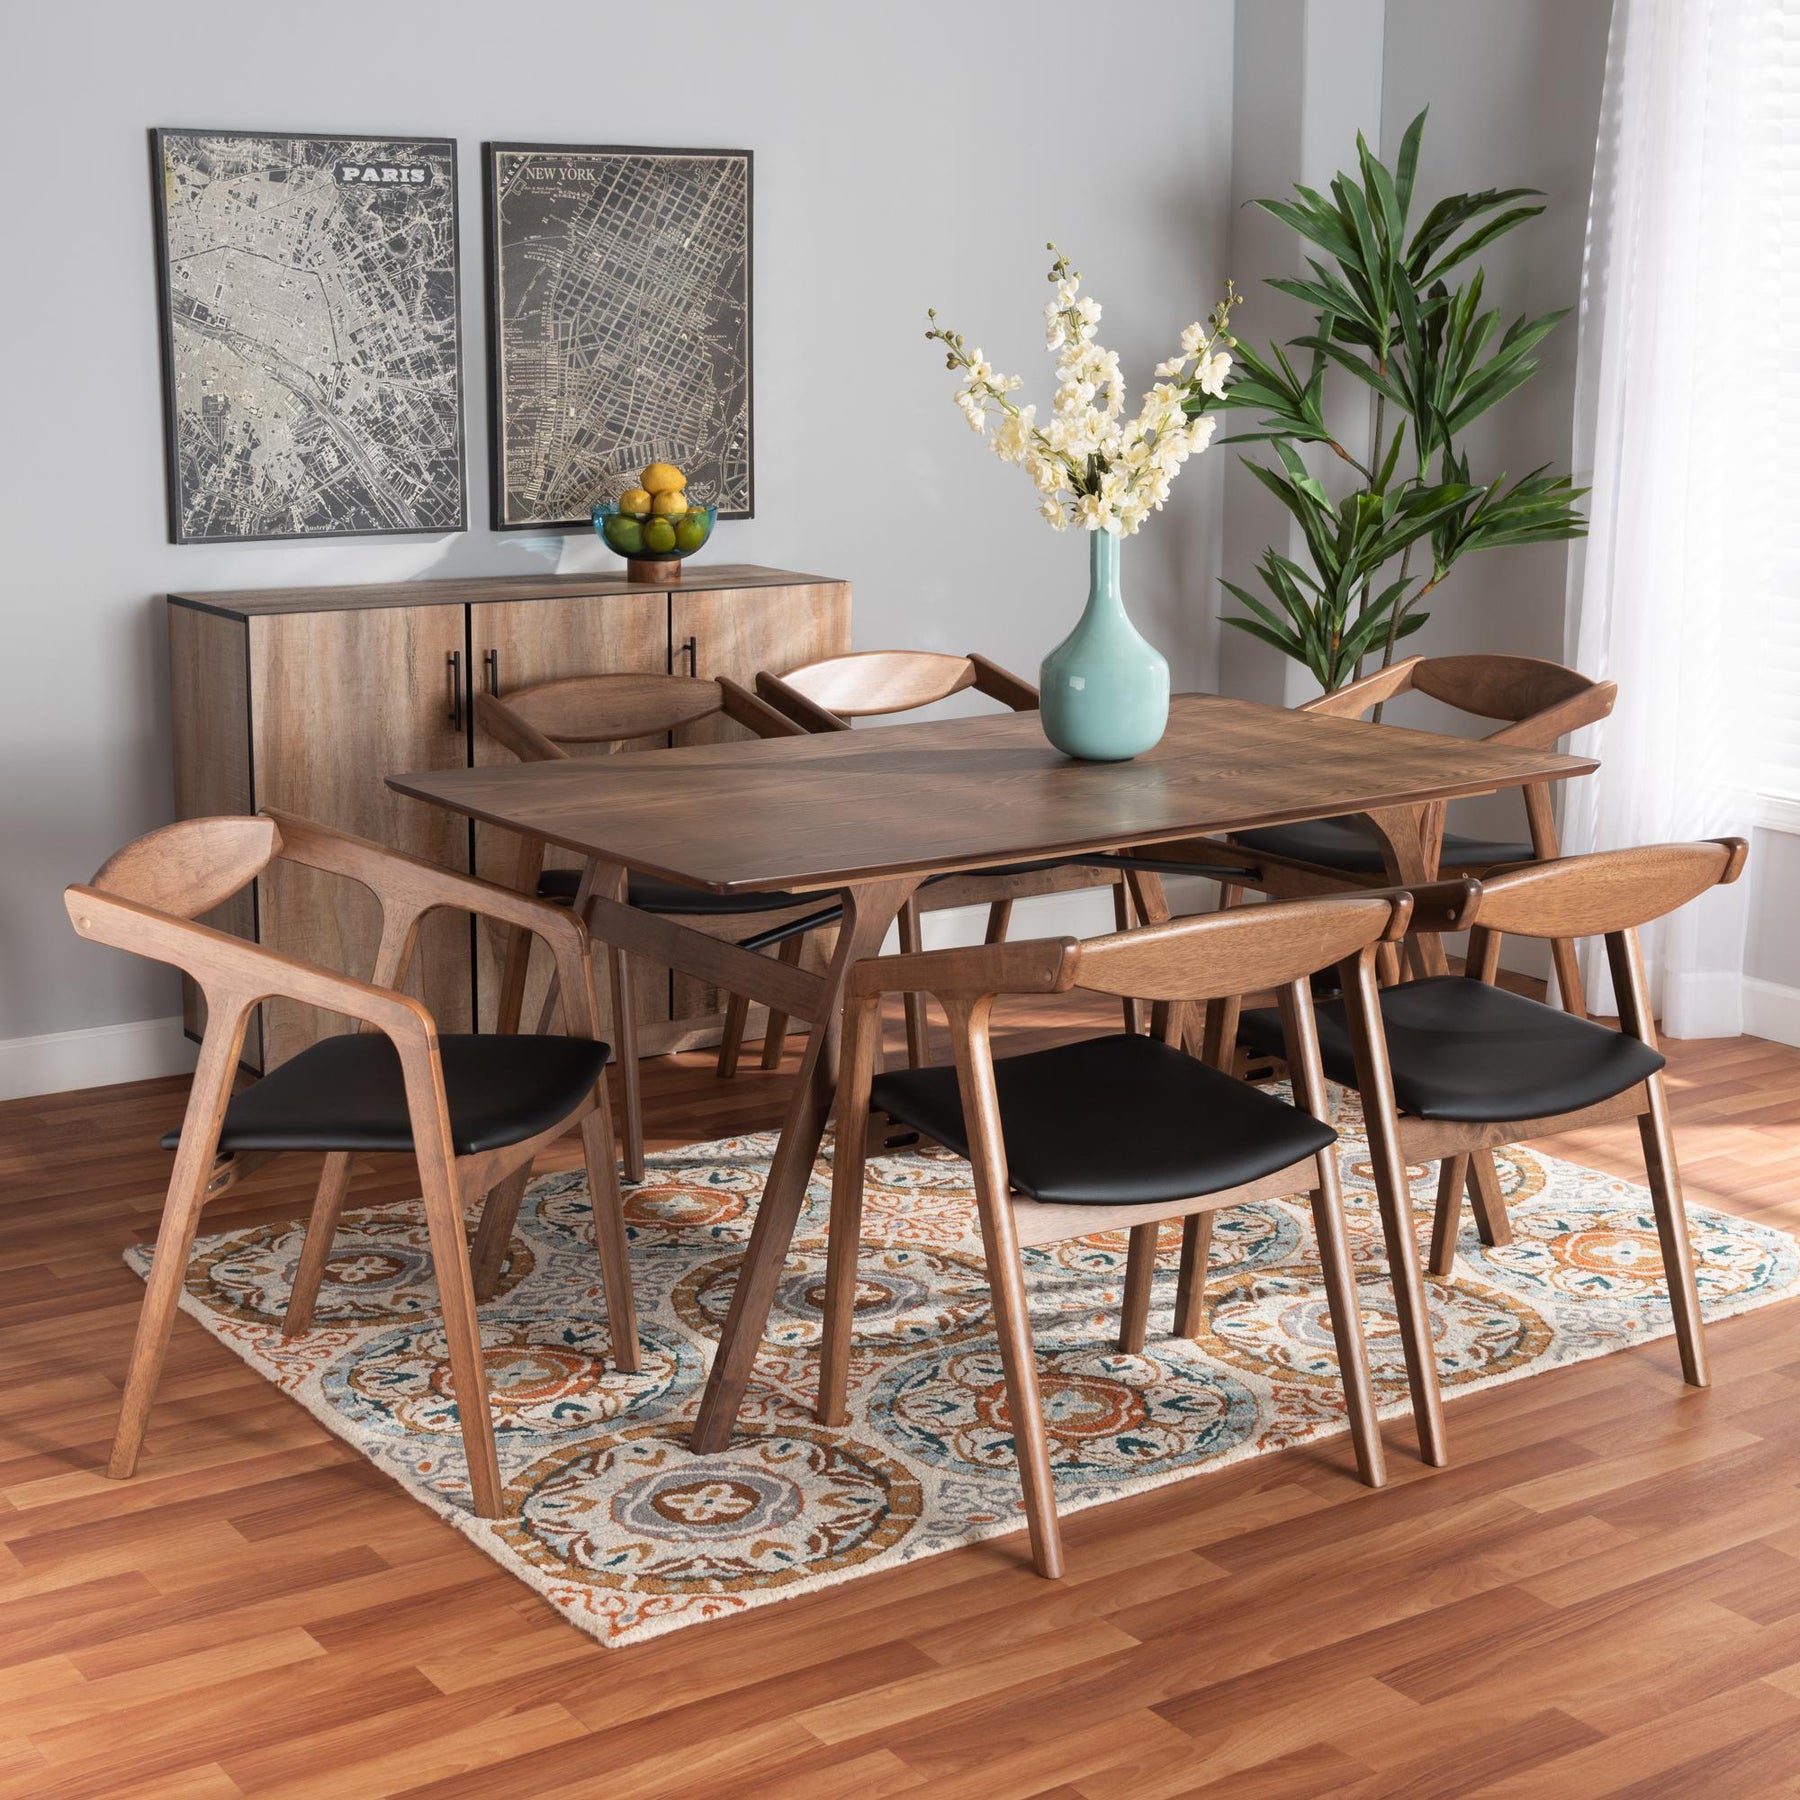 Baxton Studio Harland Mid-Century Modern Black Faux Leather Upholstered And Walnut Brown Finished Wood 7-Piece Dining Set - RDC809B-AC-Black/Walnut-7PC Dining Set